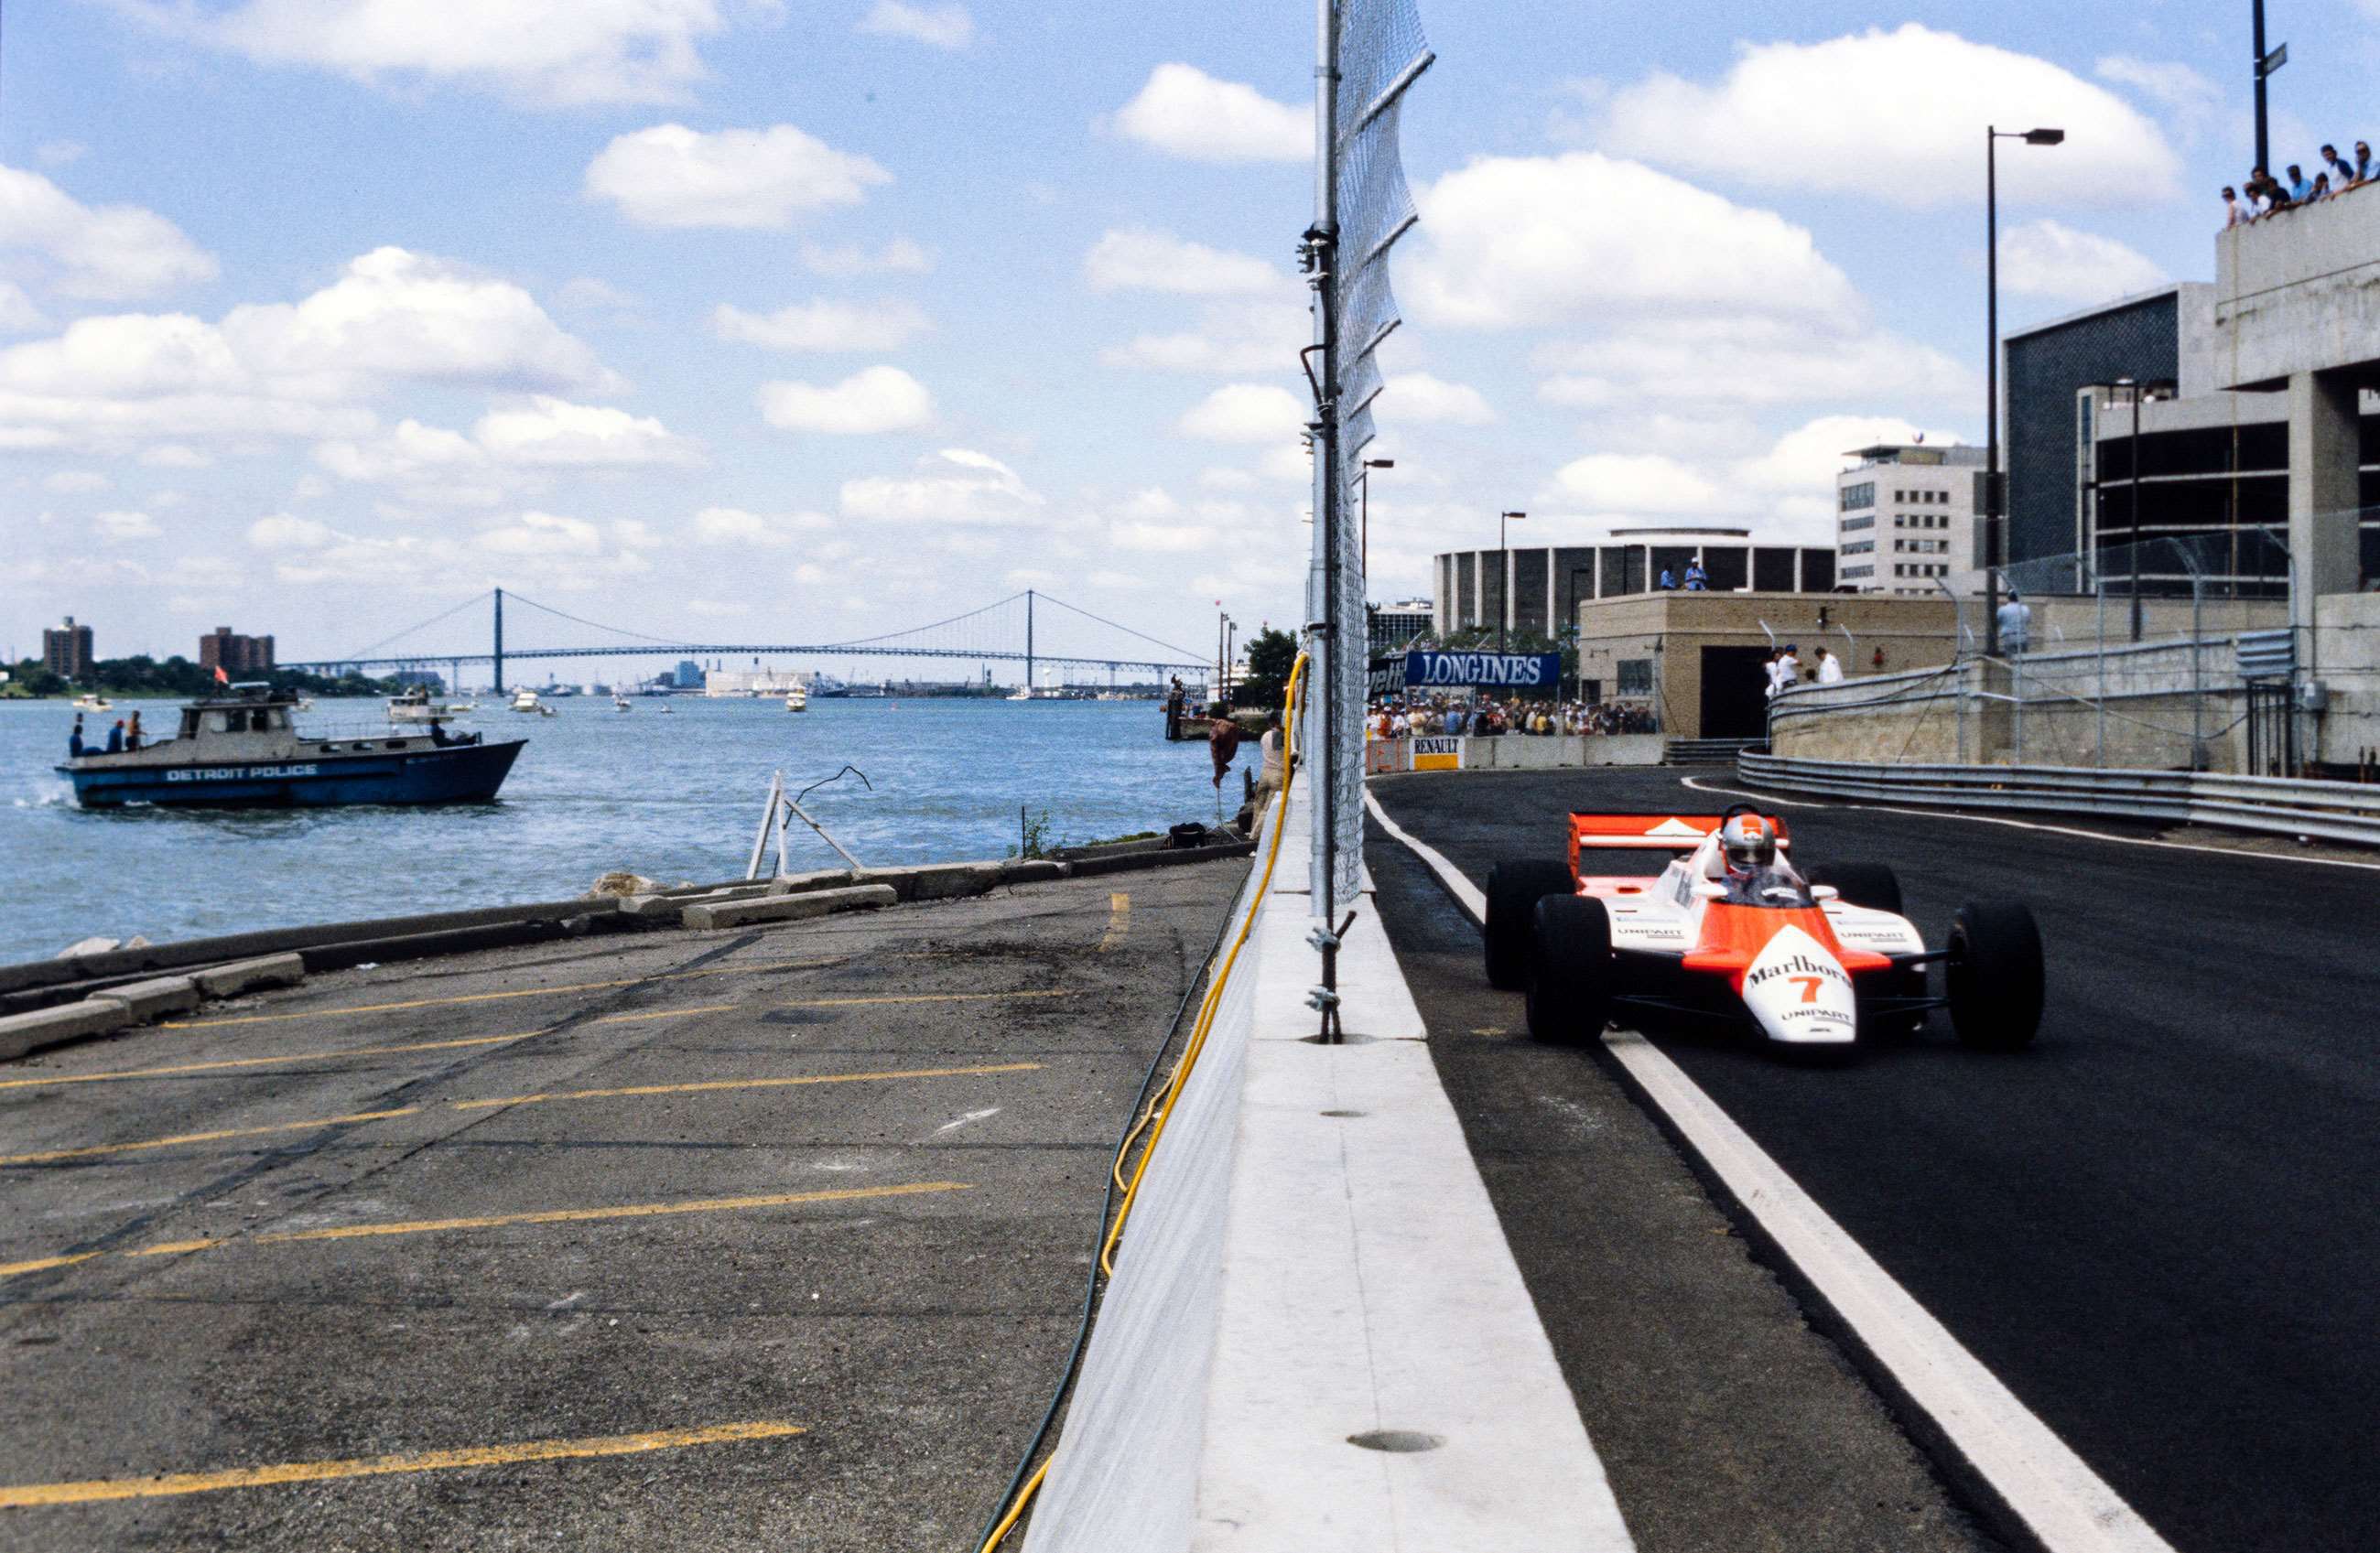 Watson speeding through the streets of Detroit, 1982. The nearby police boat does not issue a ticket. 